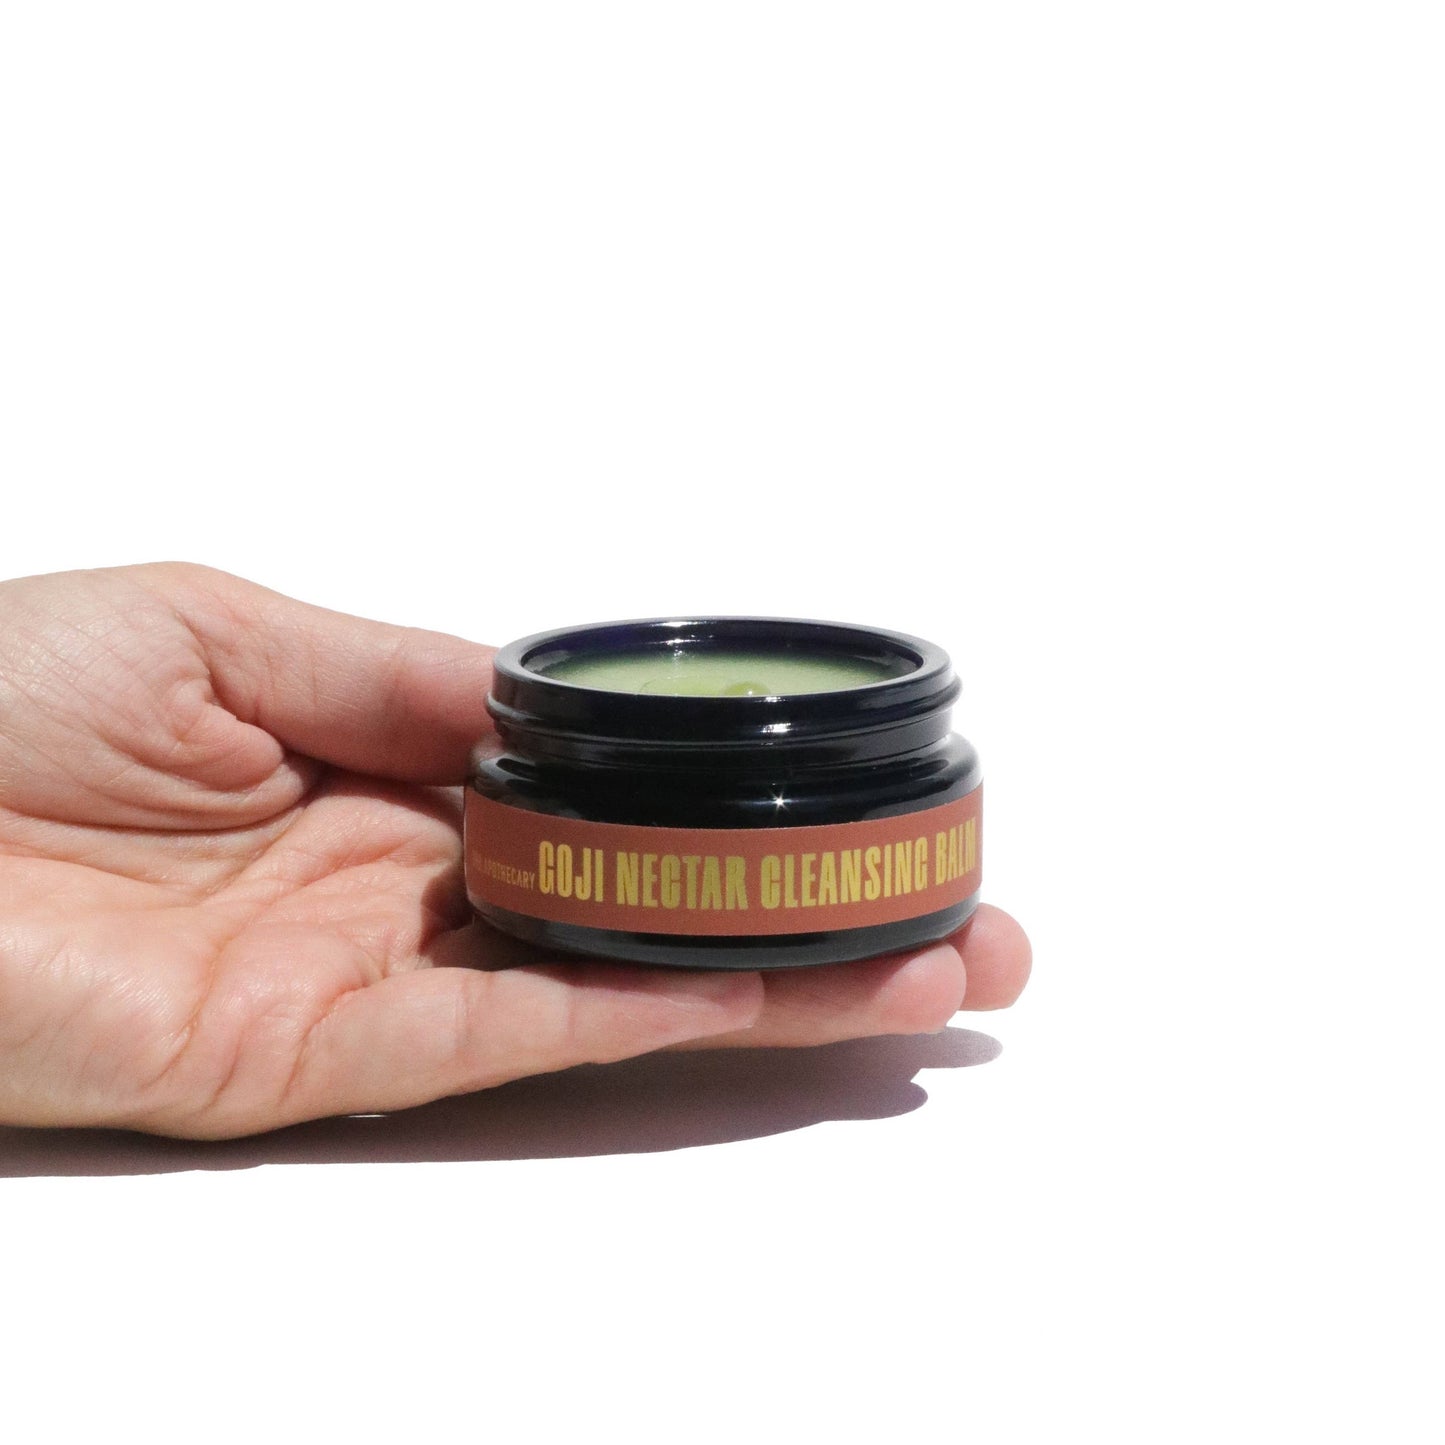 Hand holding an open jar of the Goji Nectar Cleansing Balm